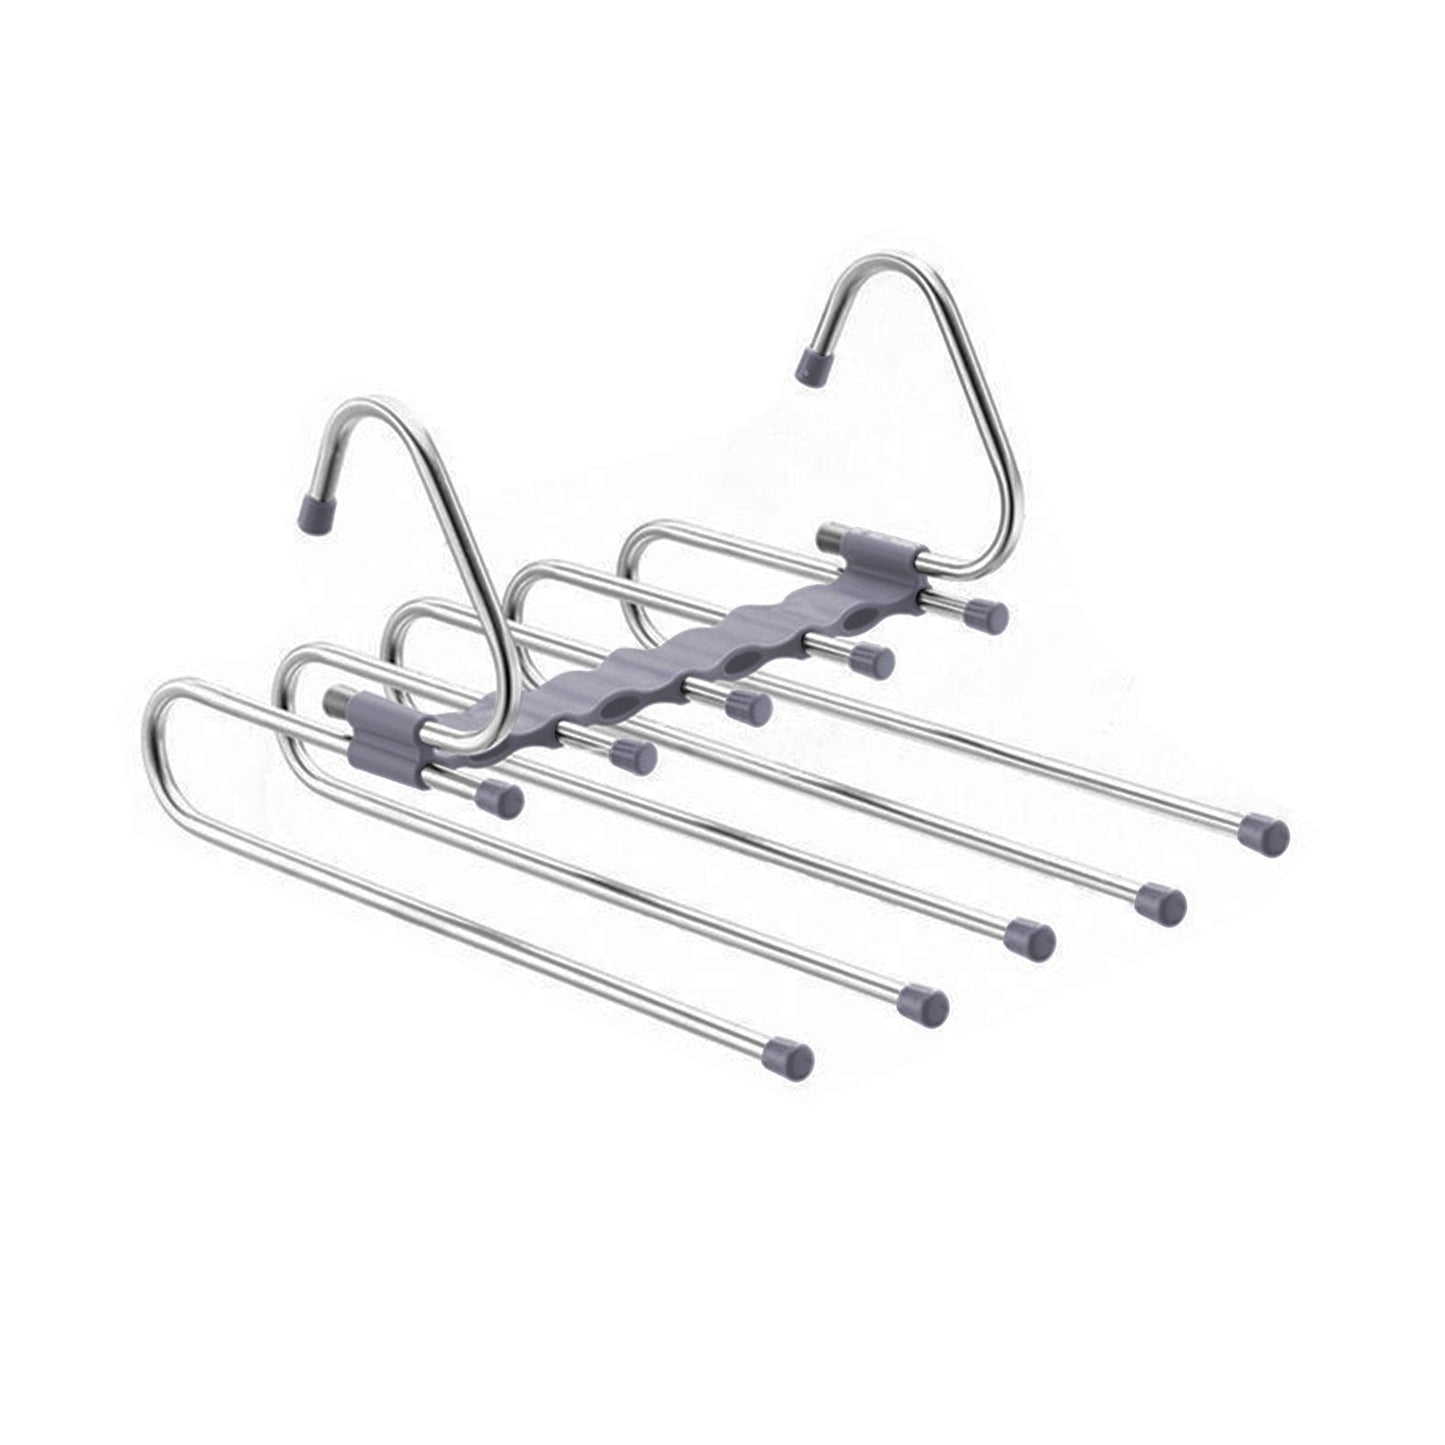 Collapsible Pants Hanger